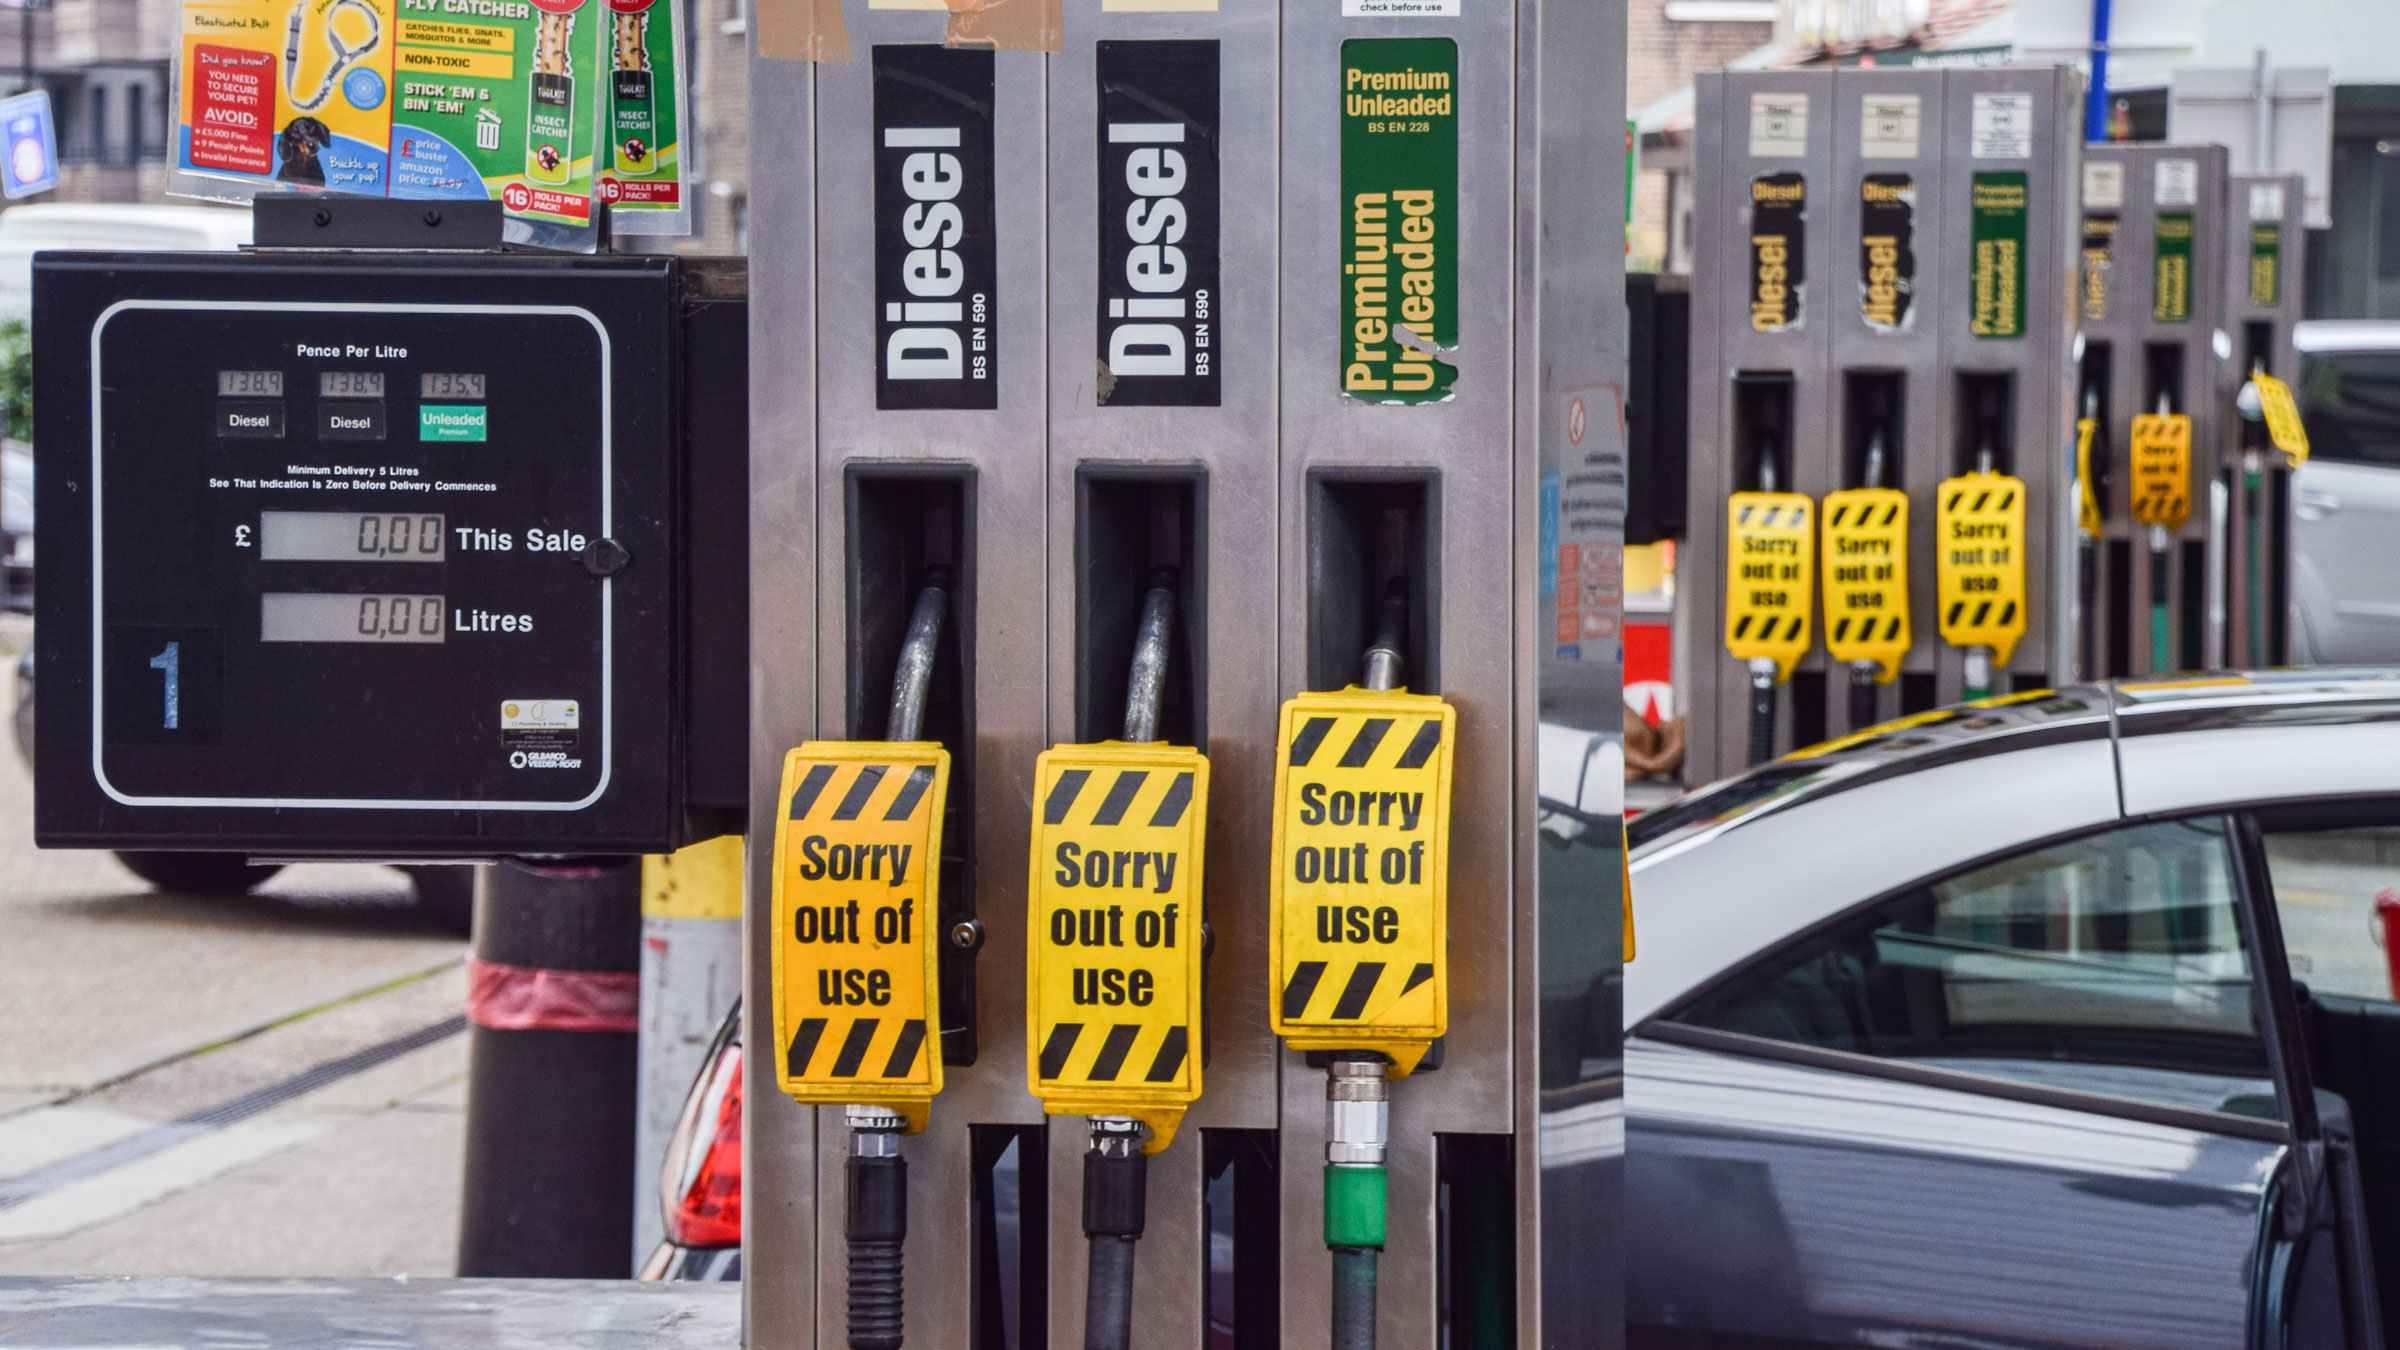 Pumps are empty at a London gas station on Sunday.